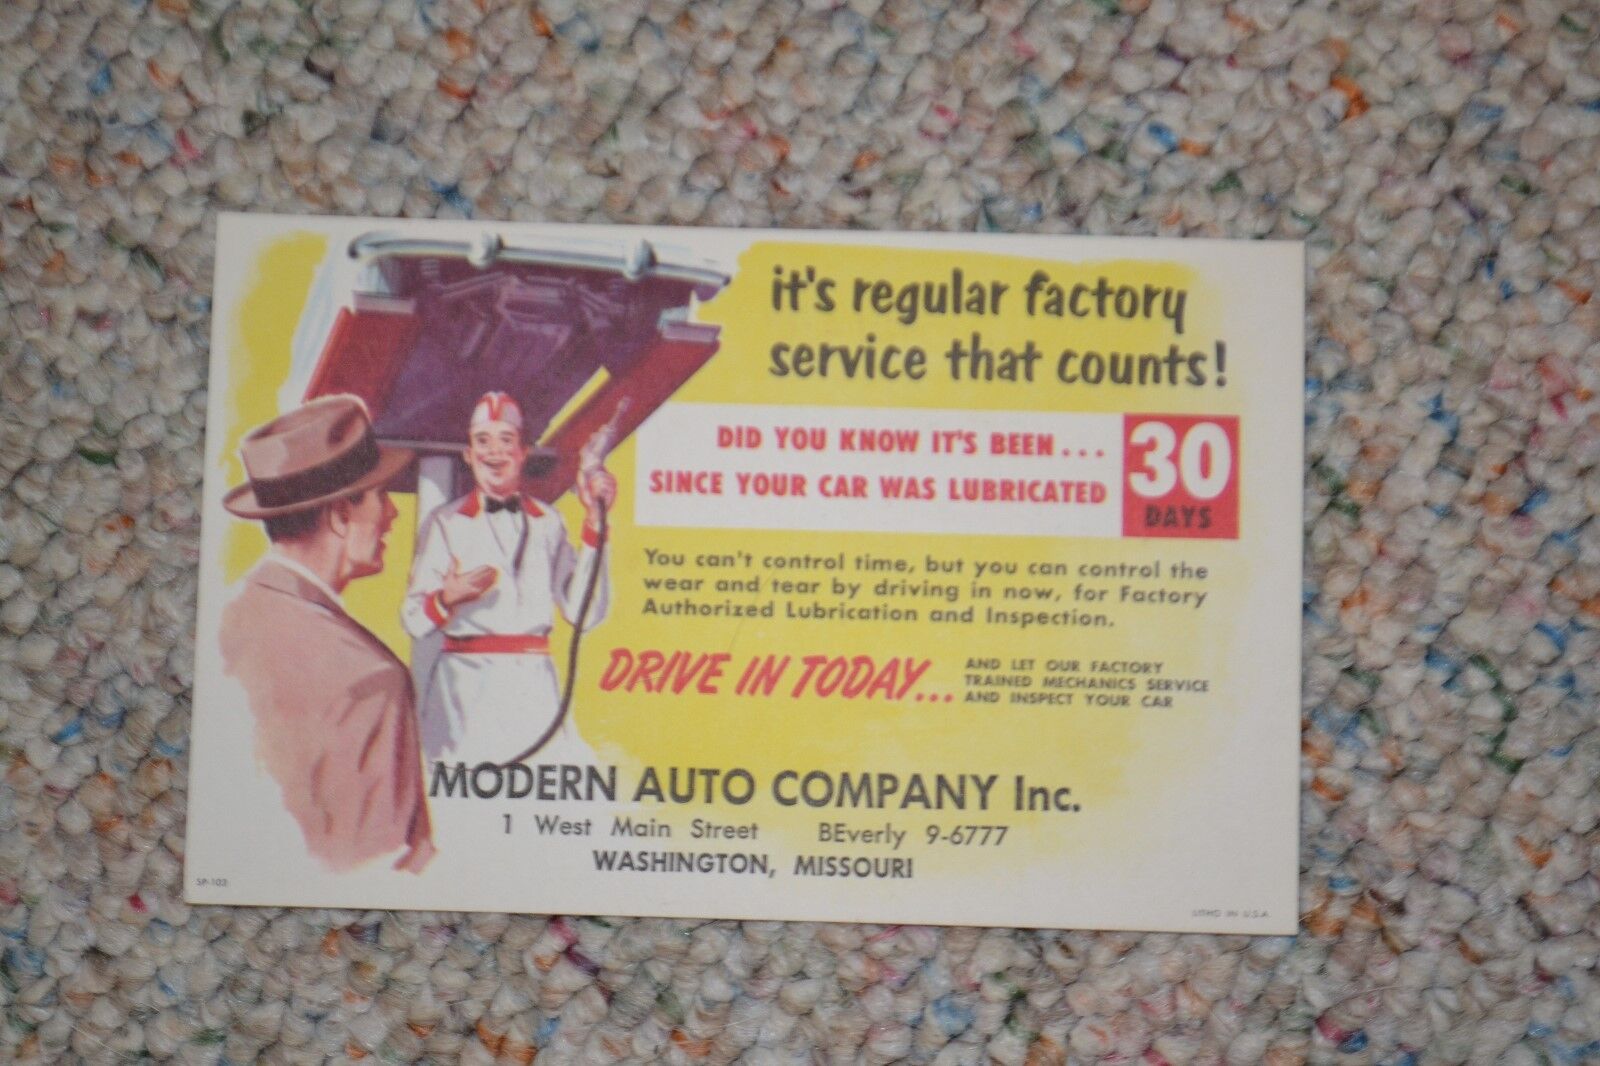 VINTAGE 1960\'s AUTOMOTIVE MAIL SERVICE CARD FROM MODERN AUTO 30 DAY LUBE SERVICE